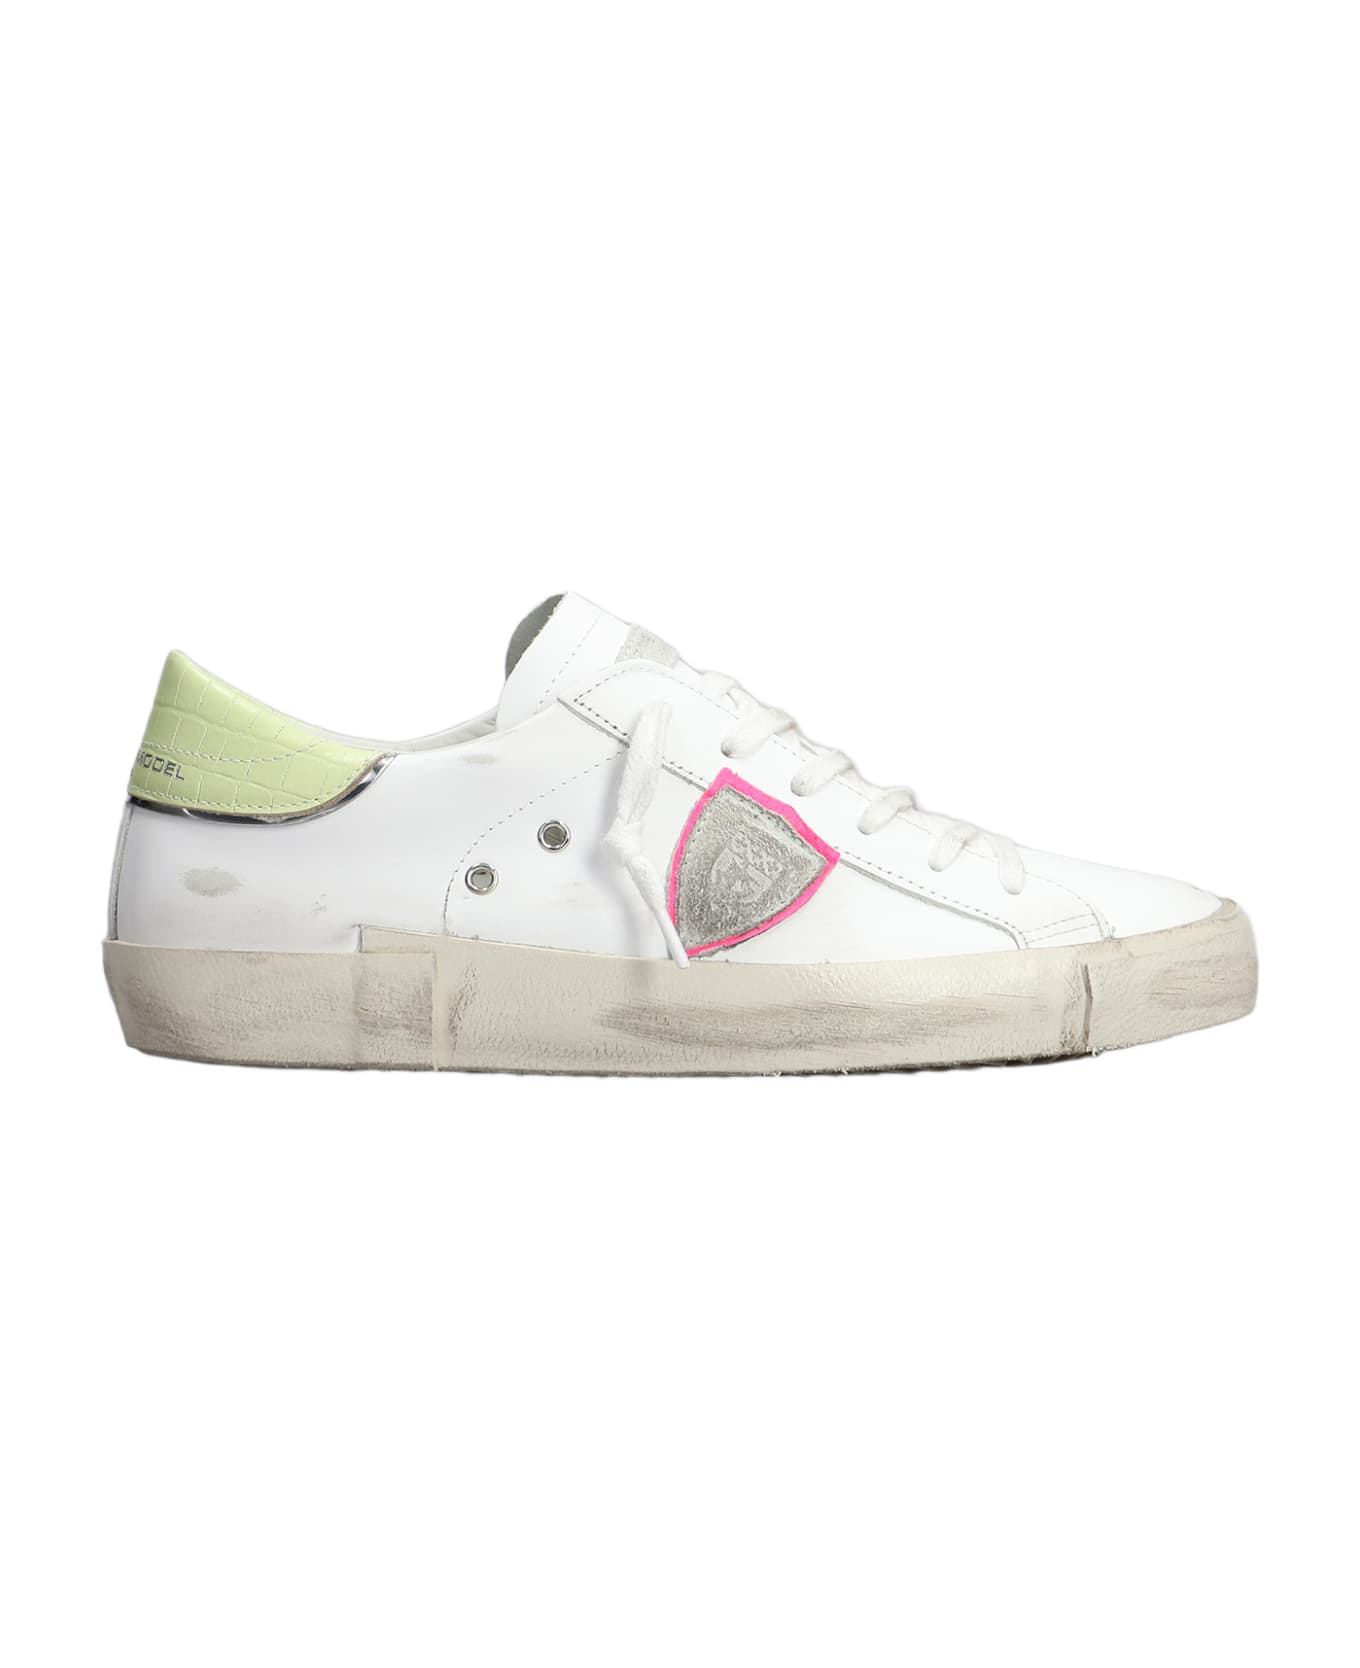 Philippe Model Prsx Low Sneakers In White Leather - Bianco